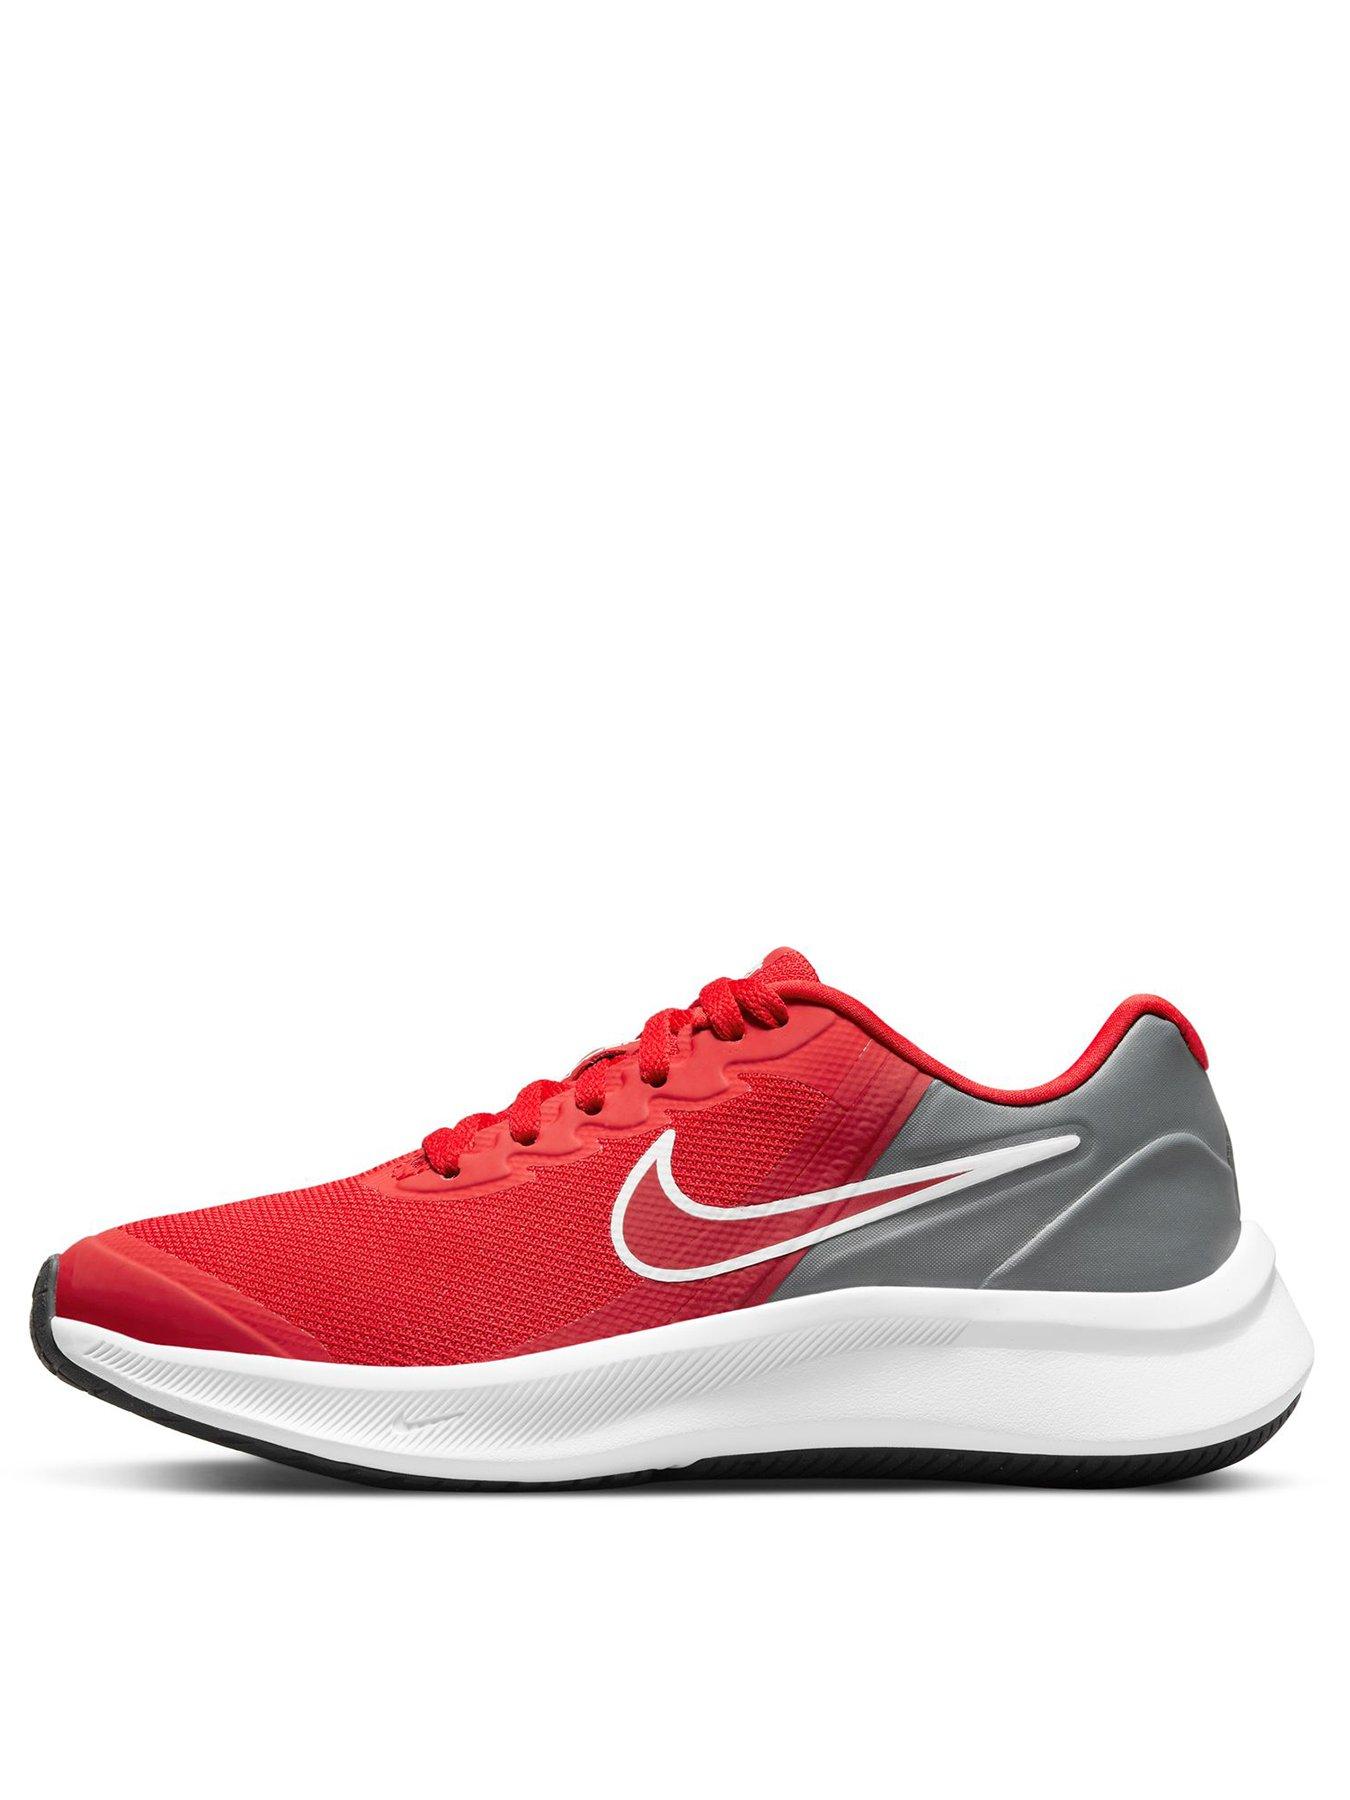 nike red trainers uk